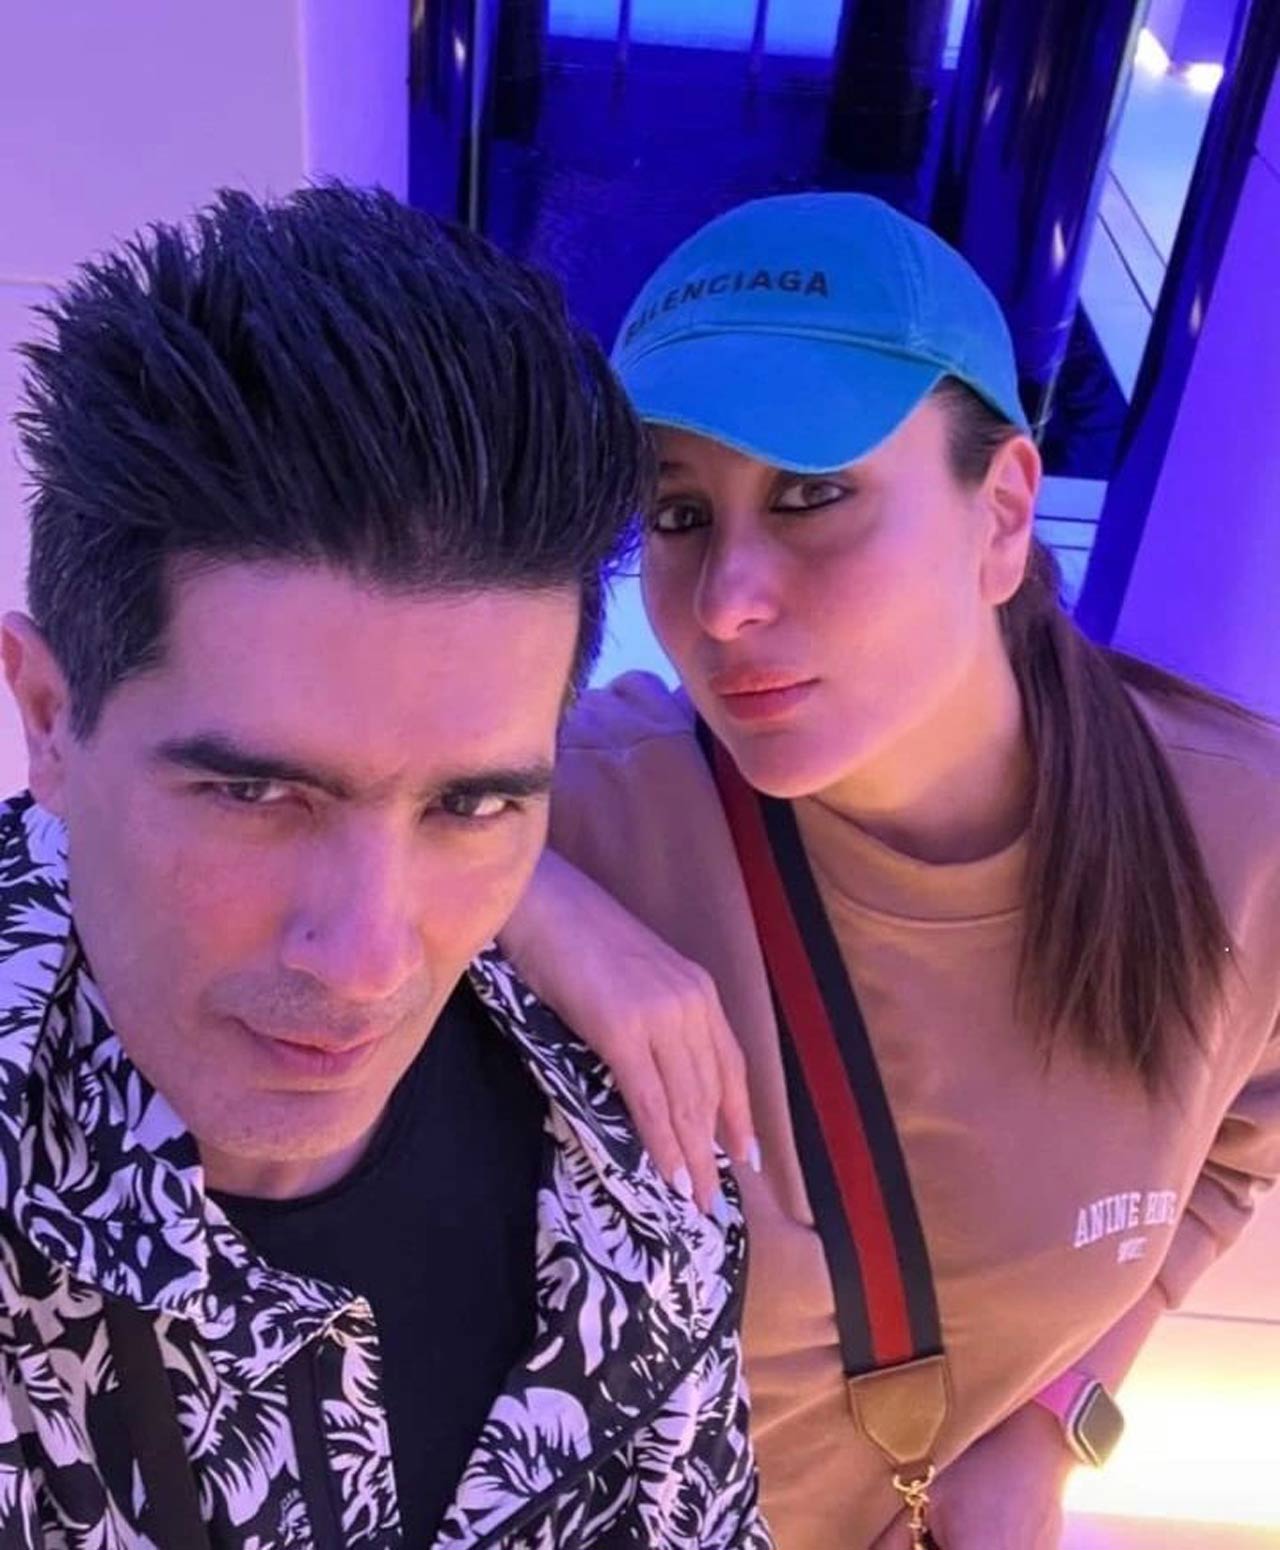 Kareena Kapoor Khan and Manish Malhotra shared this selfie all the way from the U.K. that was also uploaded by Viral Bhayani, the ace photographer. Manish and Kareena have been friends for more than two decades.  She has been seen sipping coffee., attending a Rolling Stone concert with her son Taimur and husband Saif Ali Khan and lounging around the fashion haunts of London. London and Kareena remind us of K3G right ?